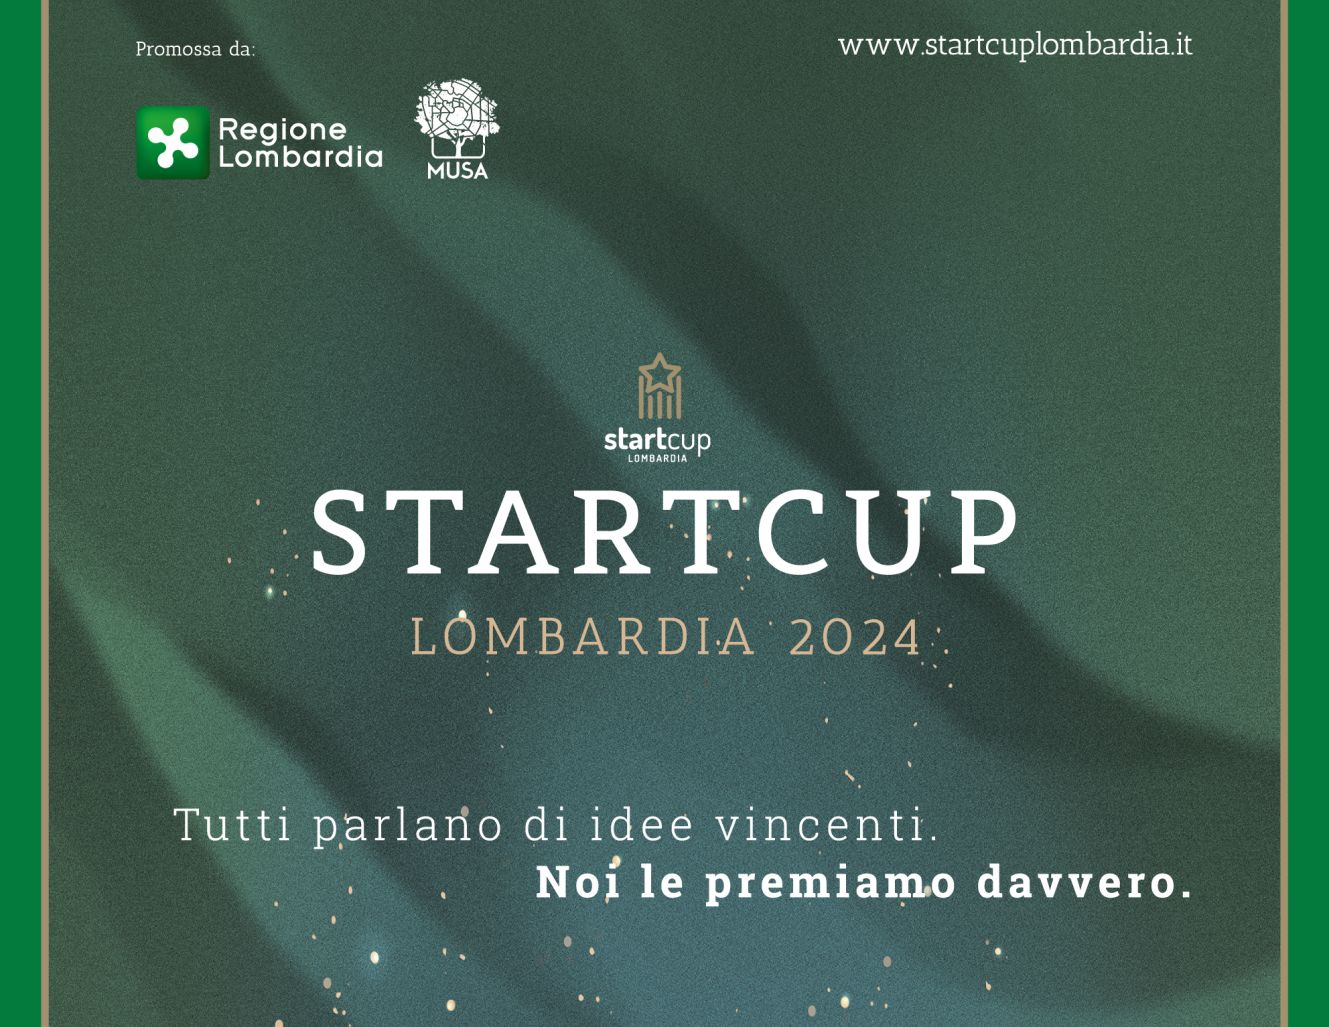 Starcup Lombardia, the challenge for young entrepreneurs in Lombardy, kicks off